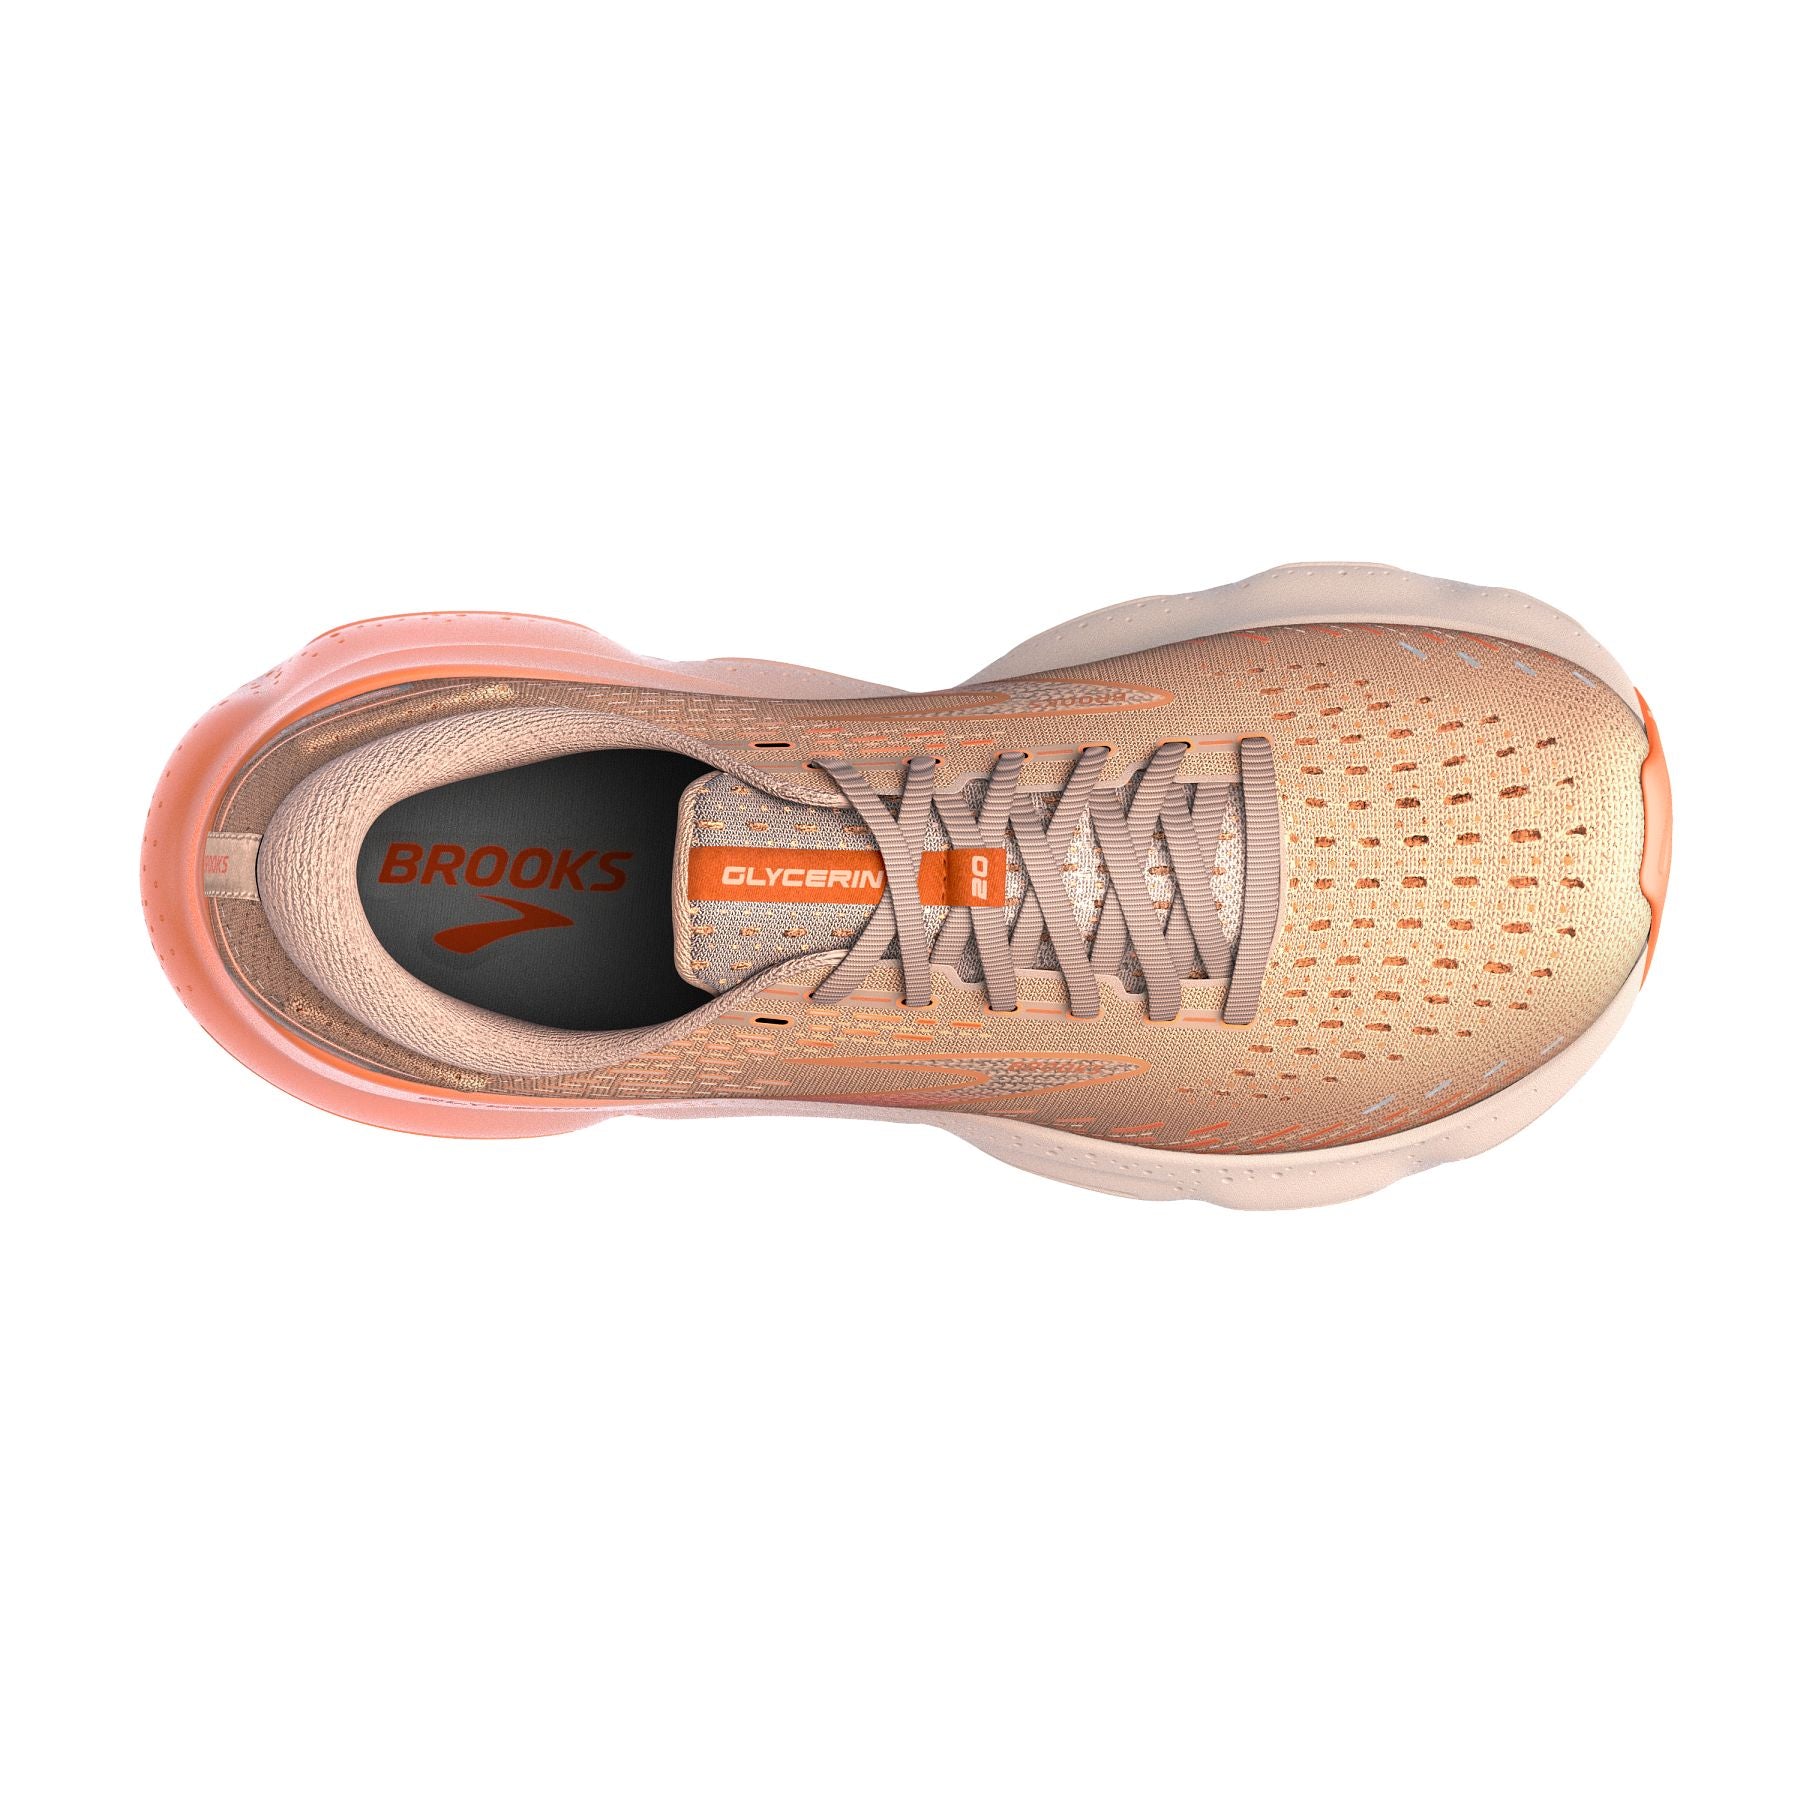 Top view of the Women's Glycerin 20 by Brook's in the color Peach/Tangerine/Orange